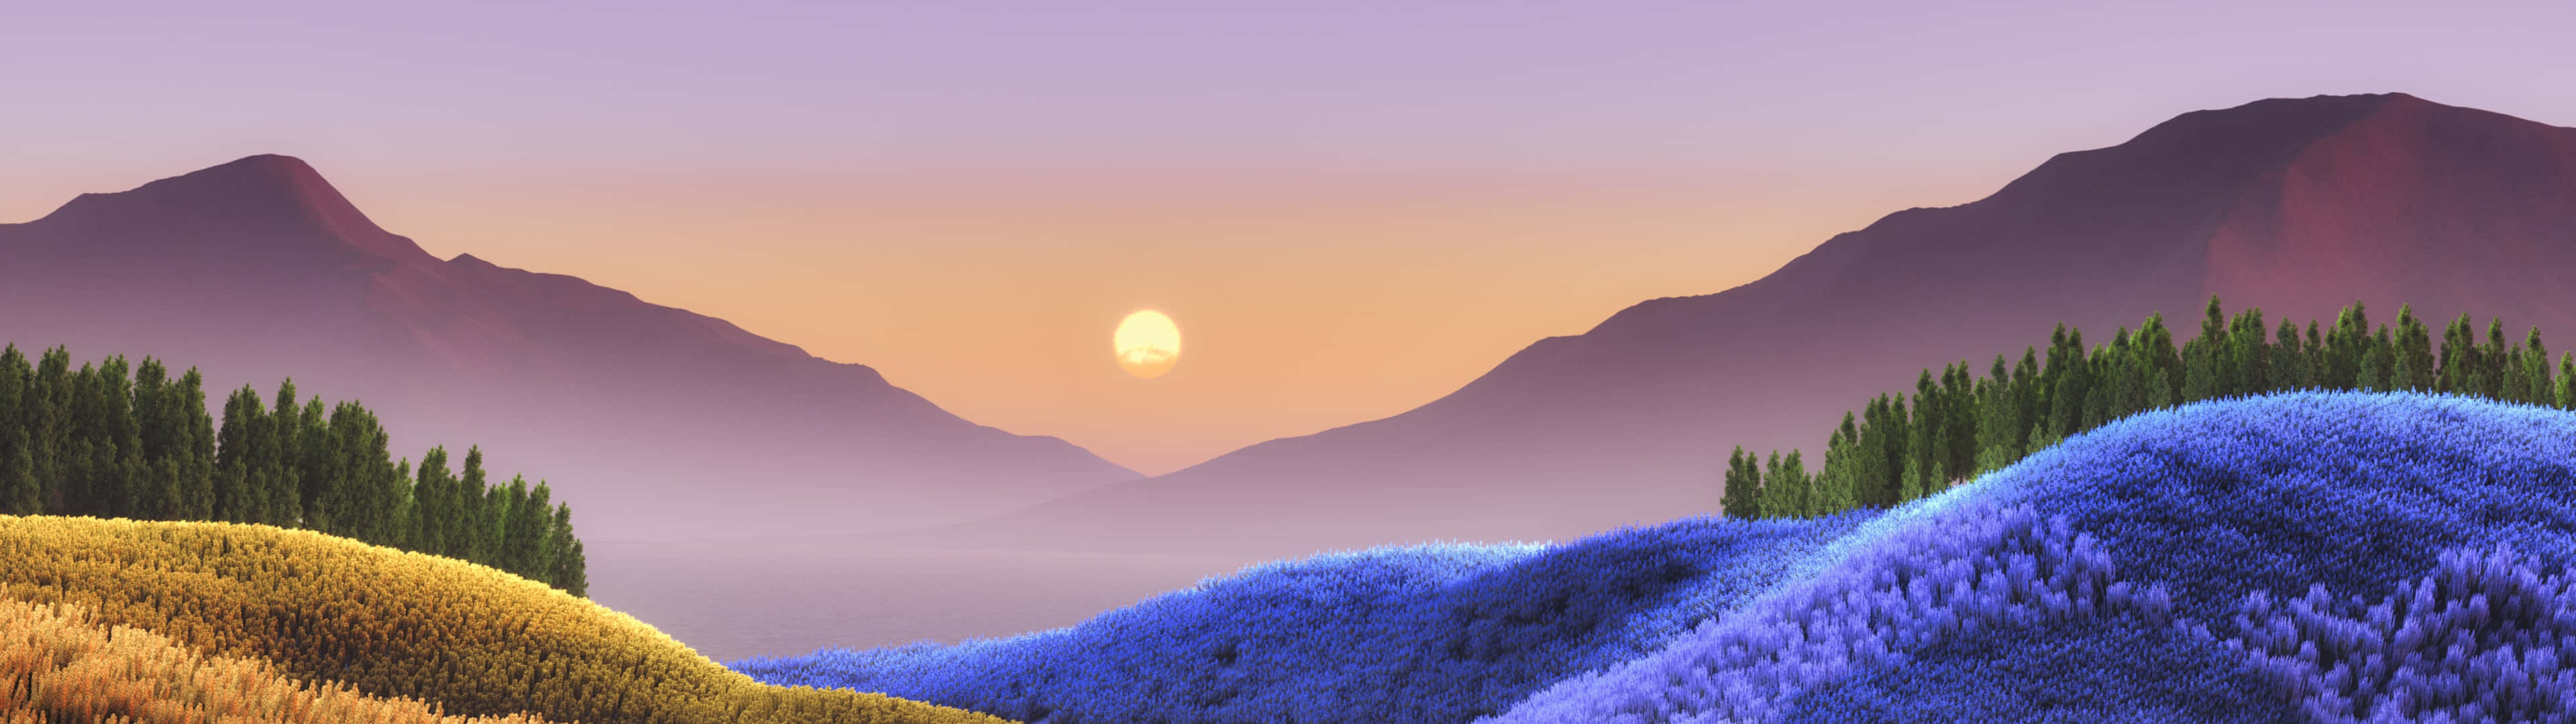 serenity dual monitor background